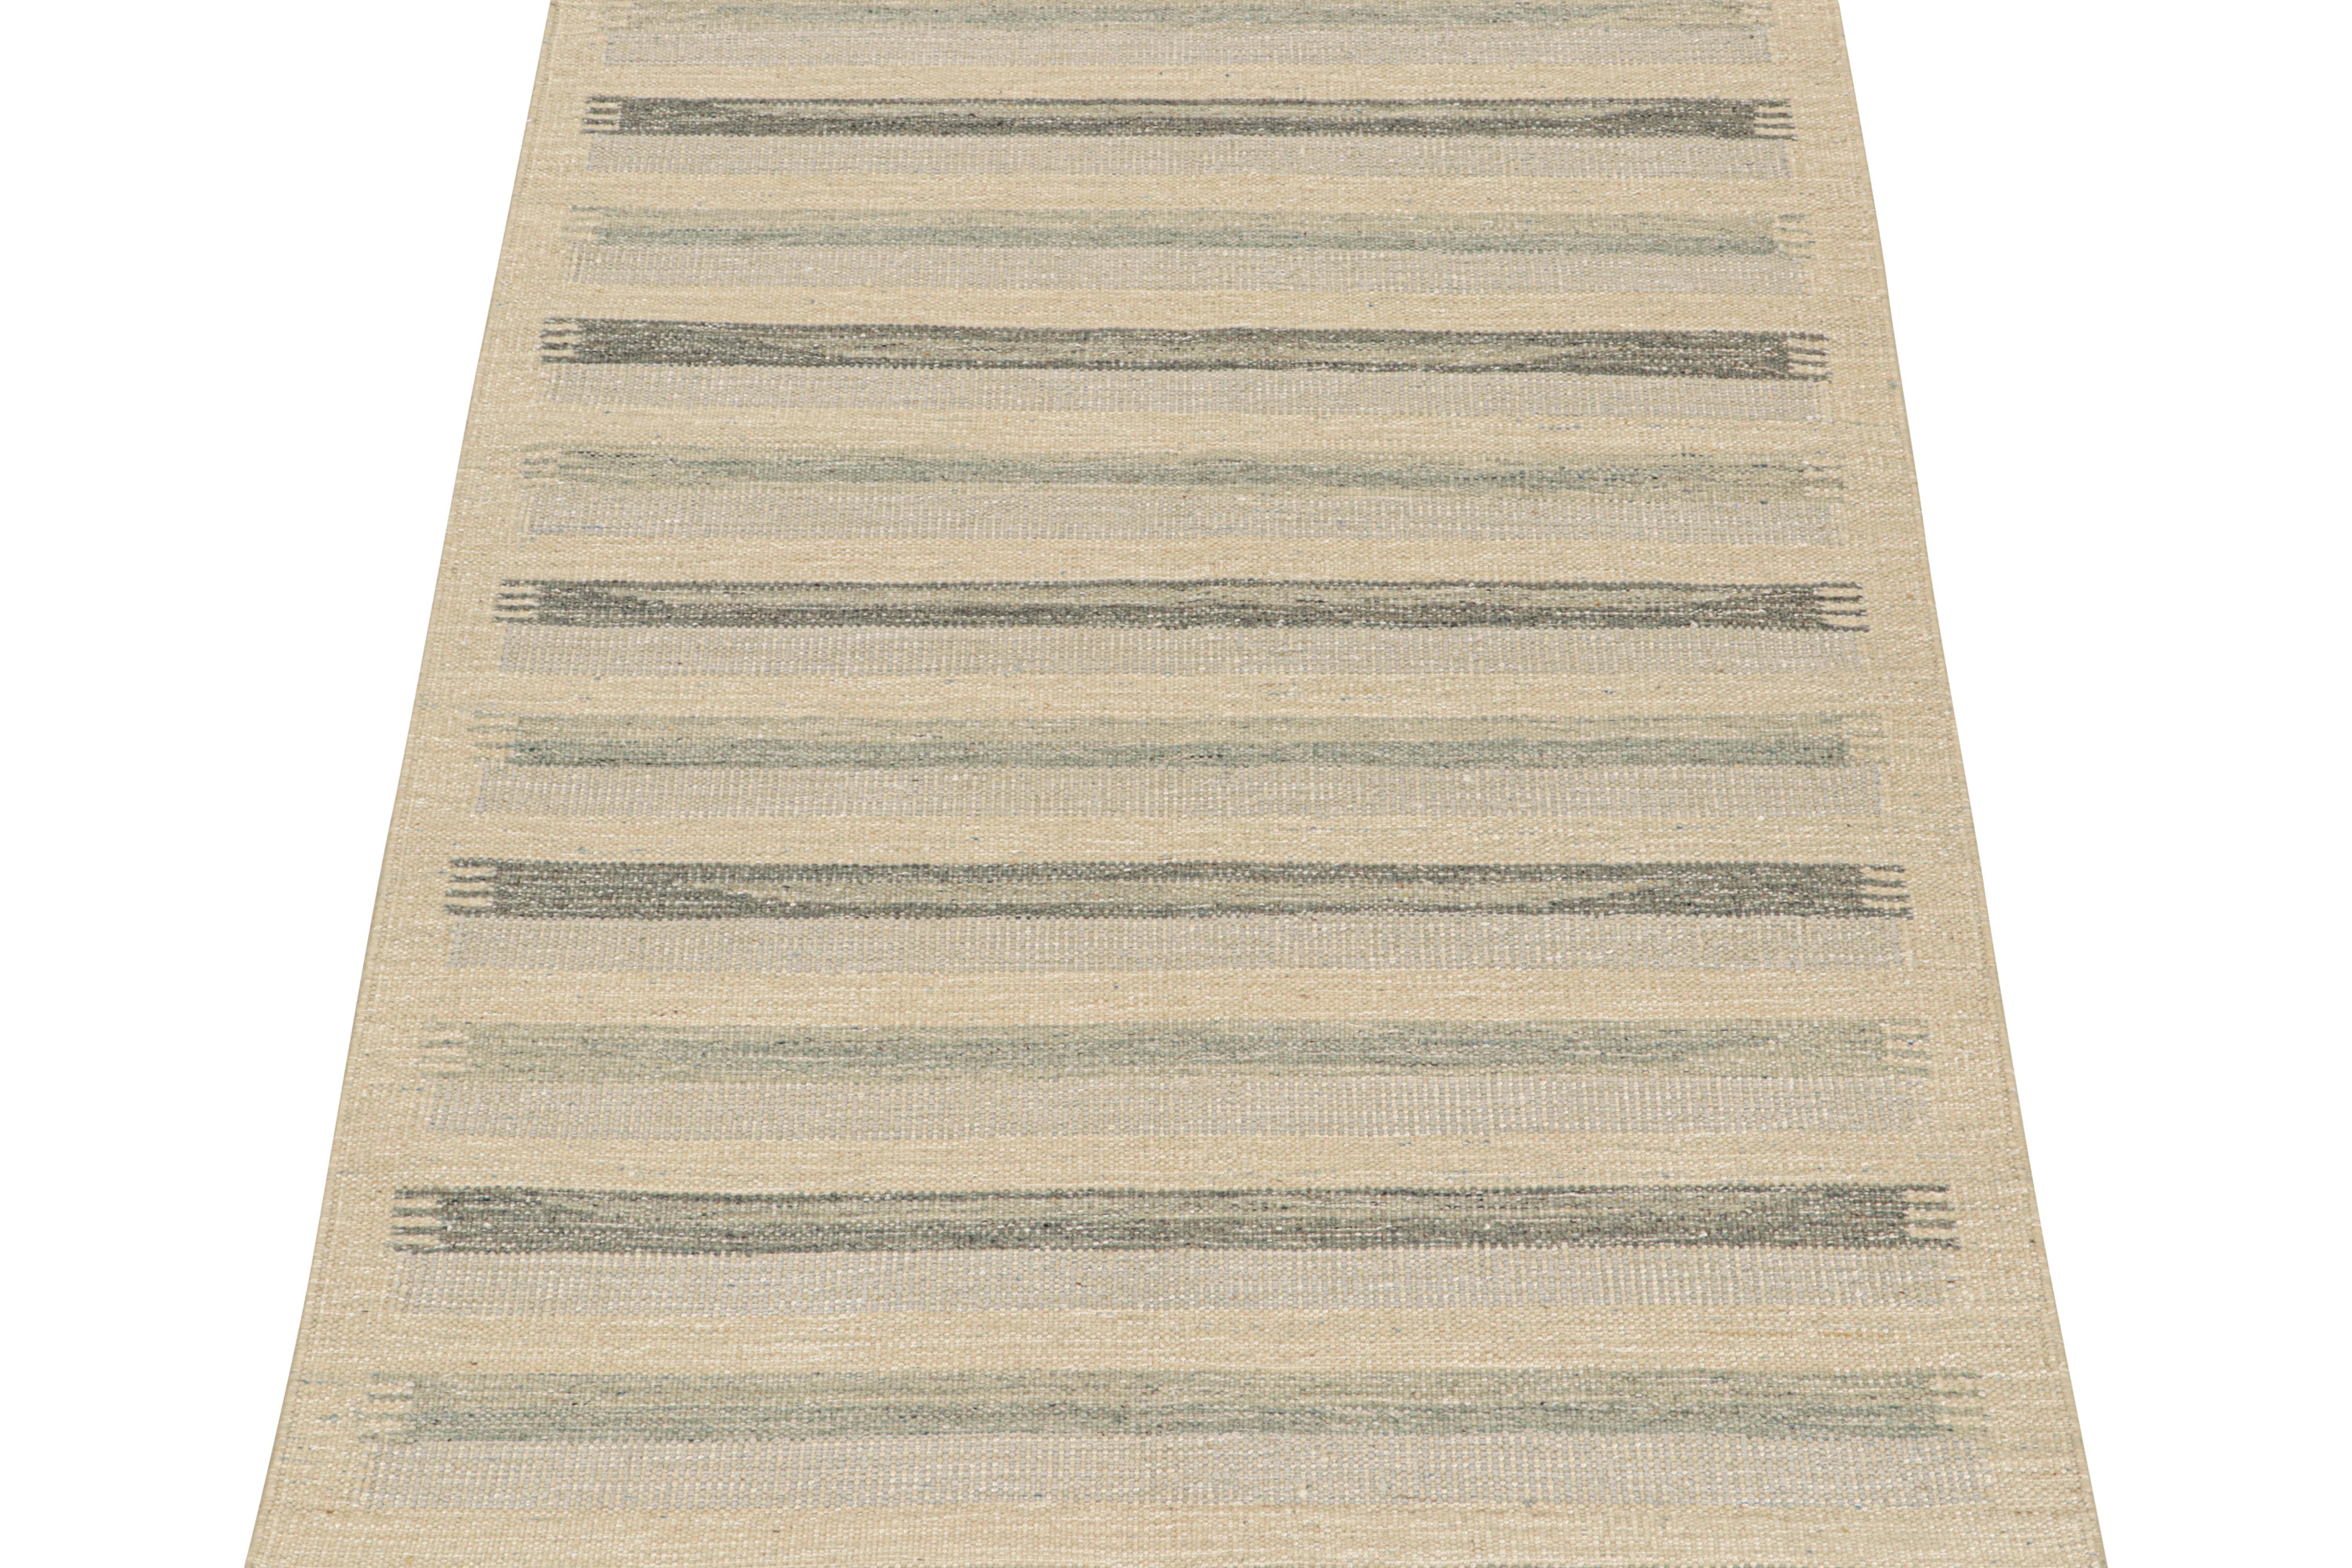 This 5 x 7 flat weave rug is a bold new addition to the Scandinavian Collection by Rug & Kilim. Handwoven in wool and natural yarns, its design reflects a contemporary take on midcentury Rollakans and Swedish 
Deco style.

On the design:

This new